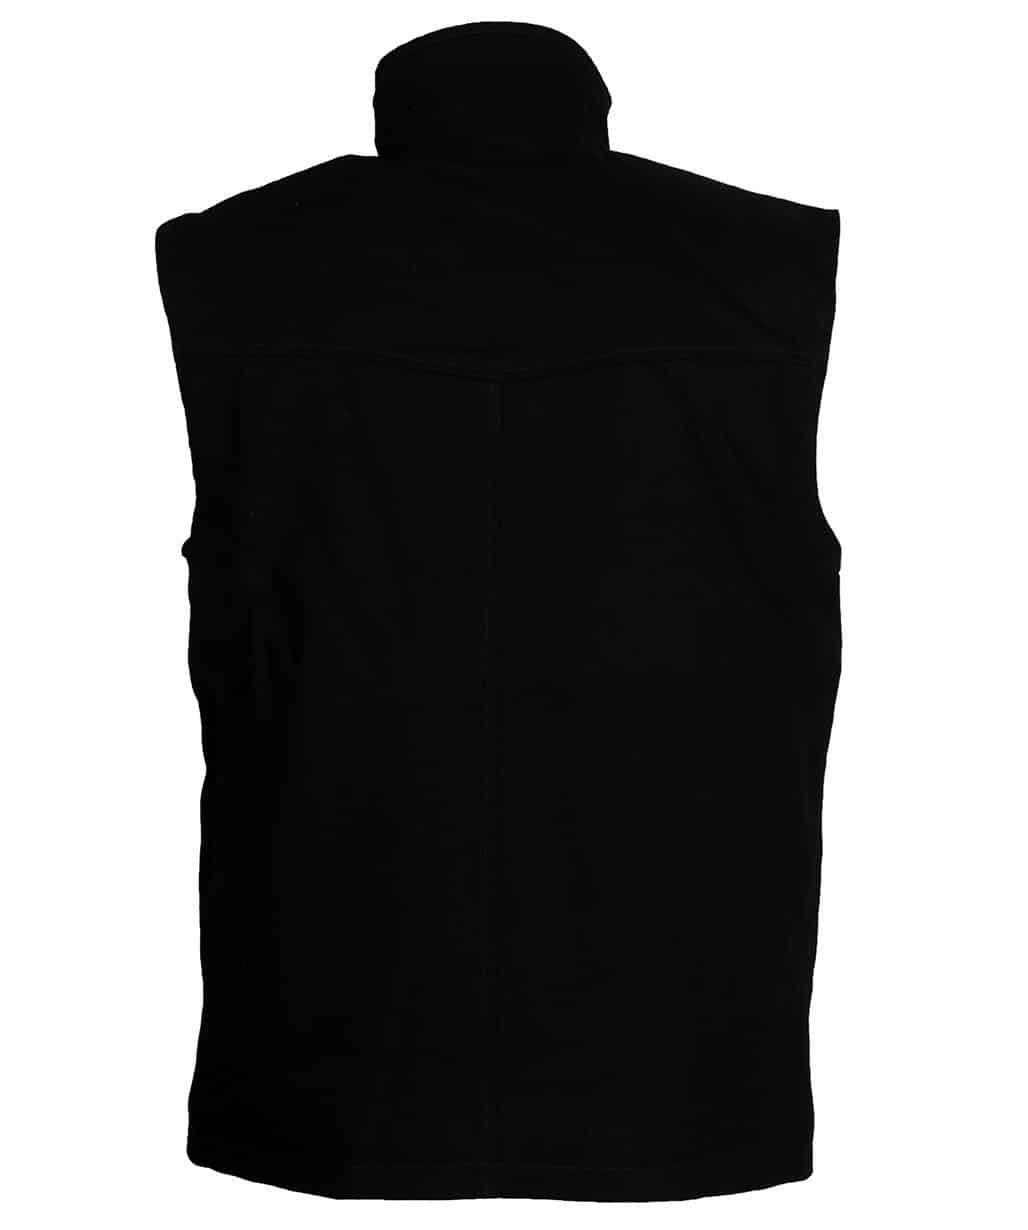 kevin-costner-john-dutton-black-cotton-vest-yellowstone-outfits 3